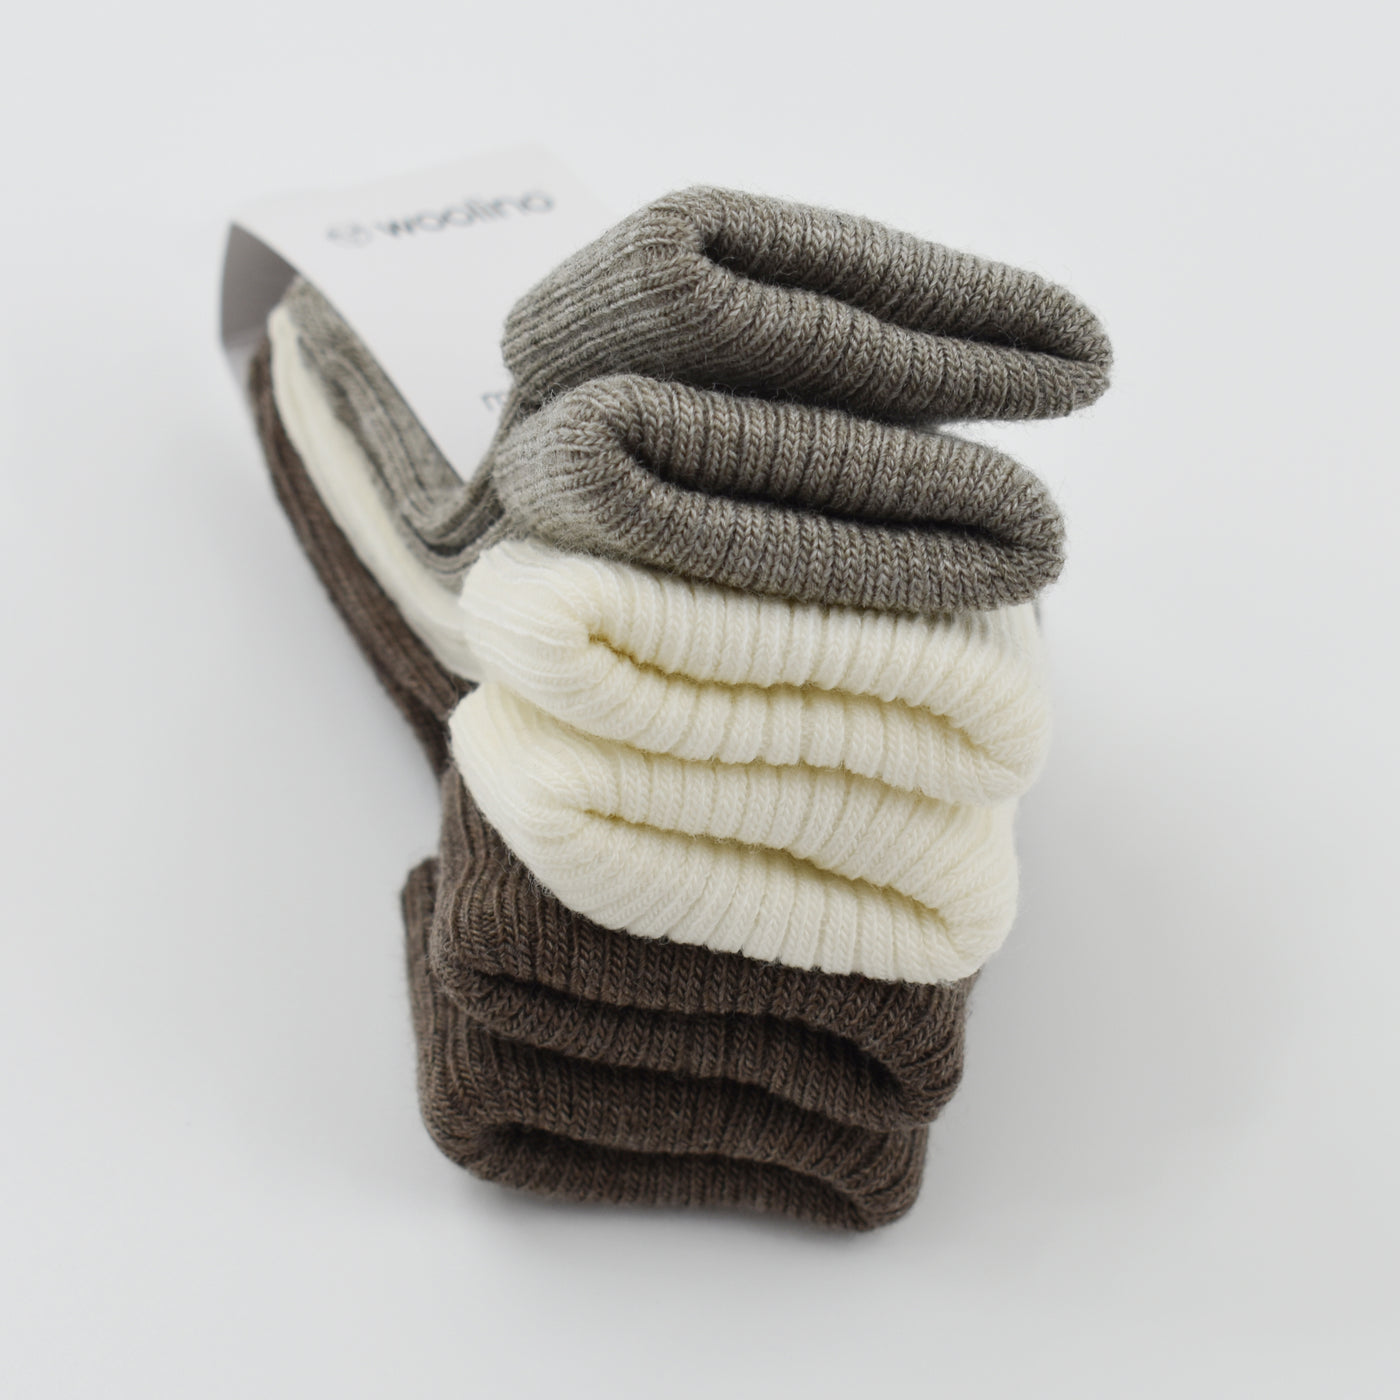 Wool Socks, Baby and Toddler, Brown-Gray & White